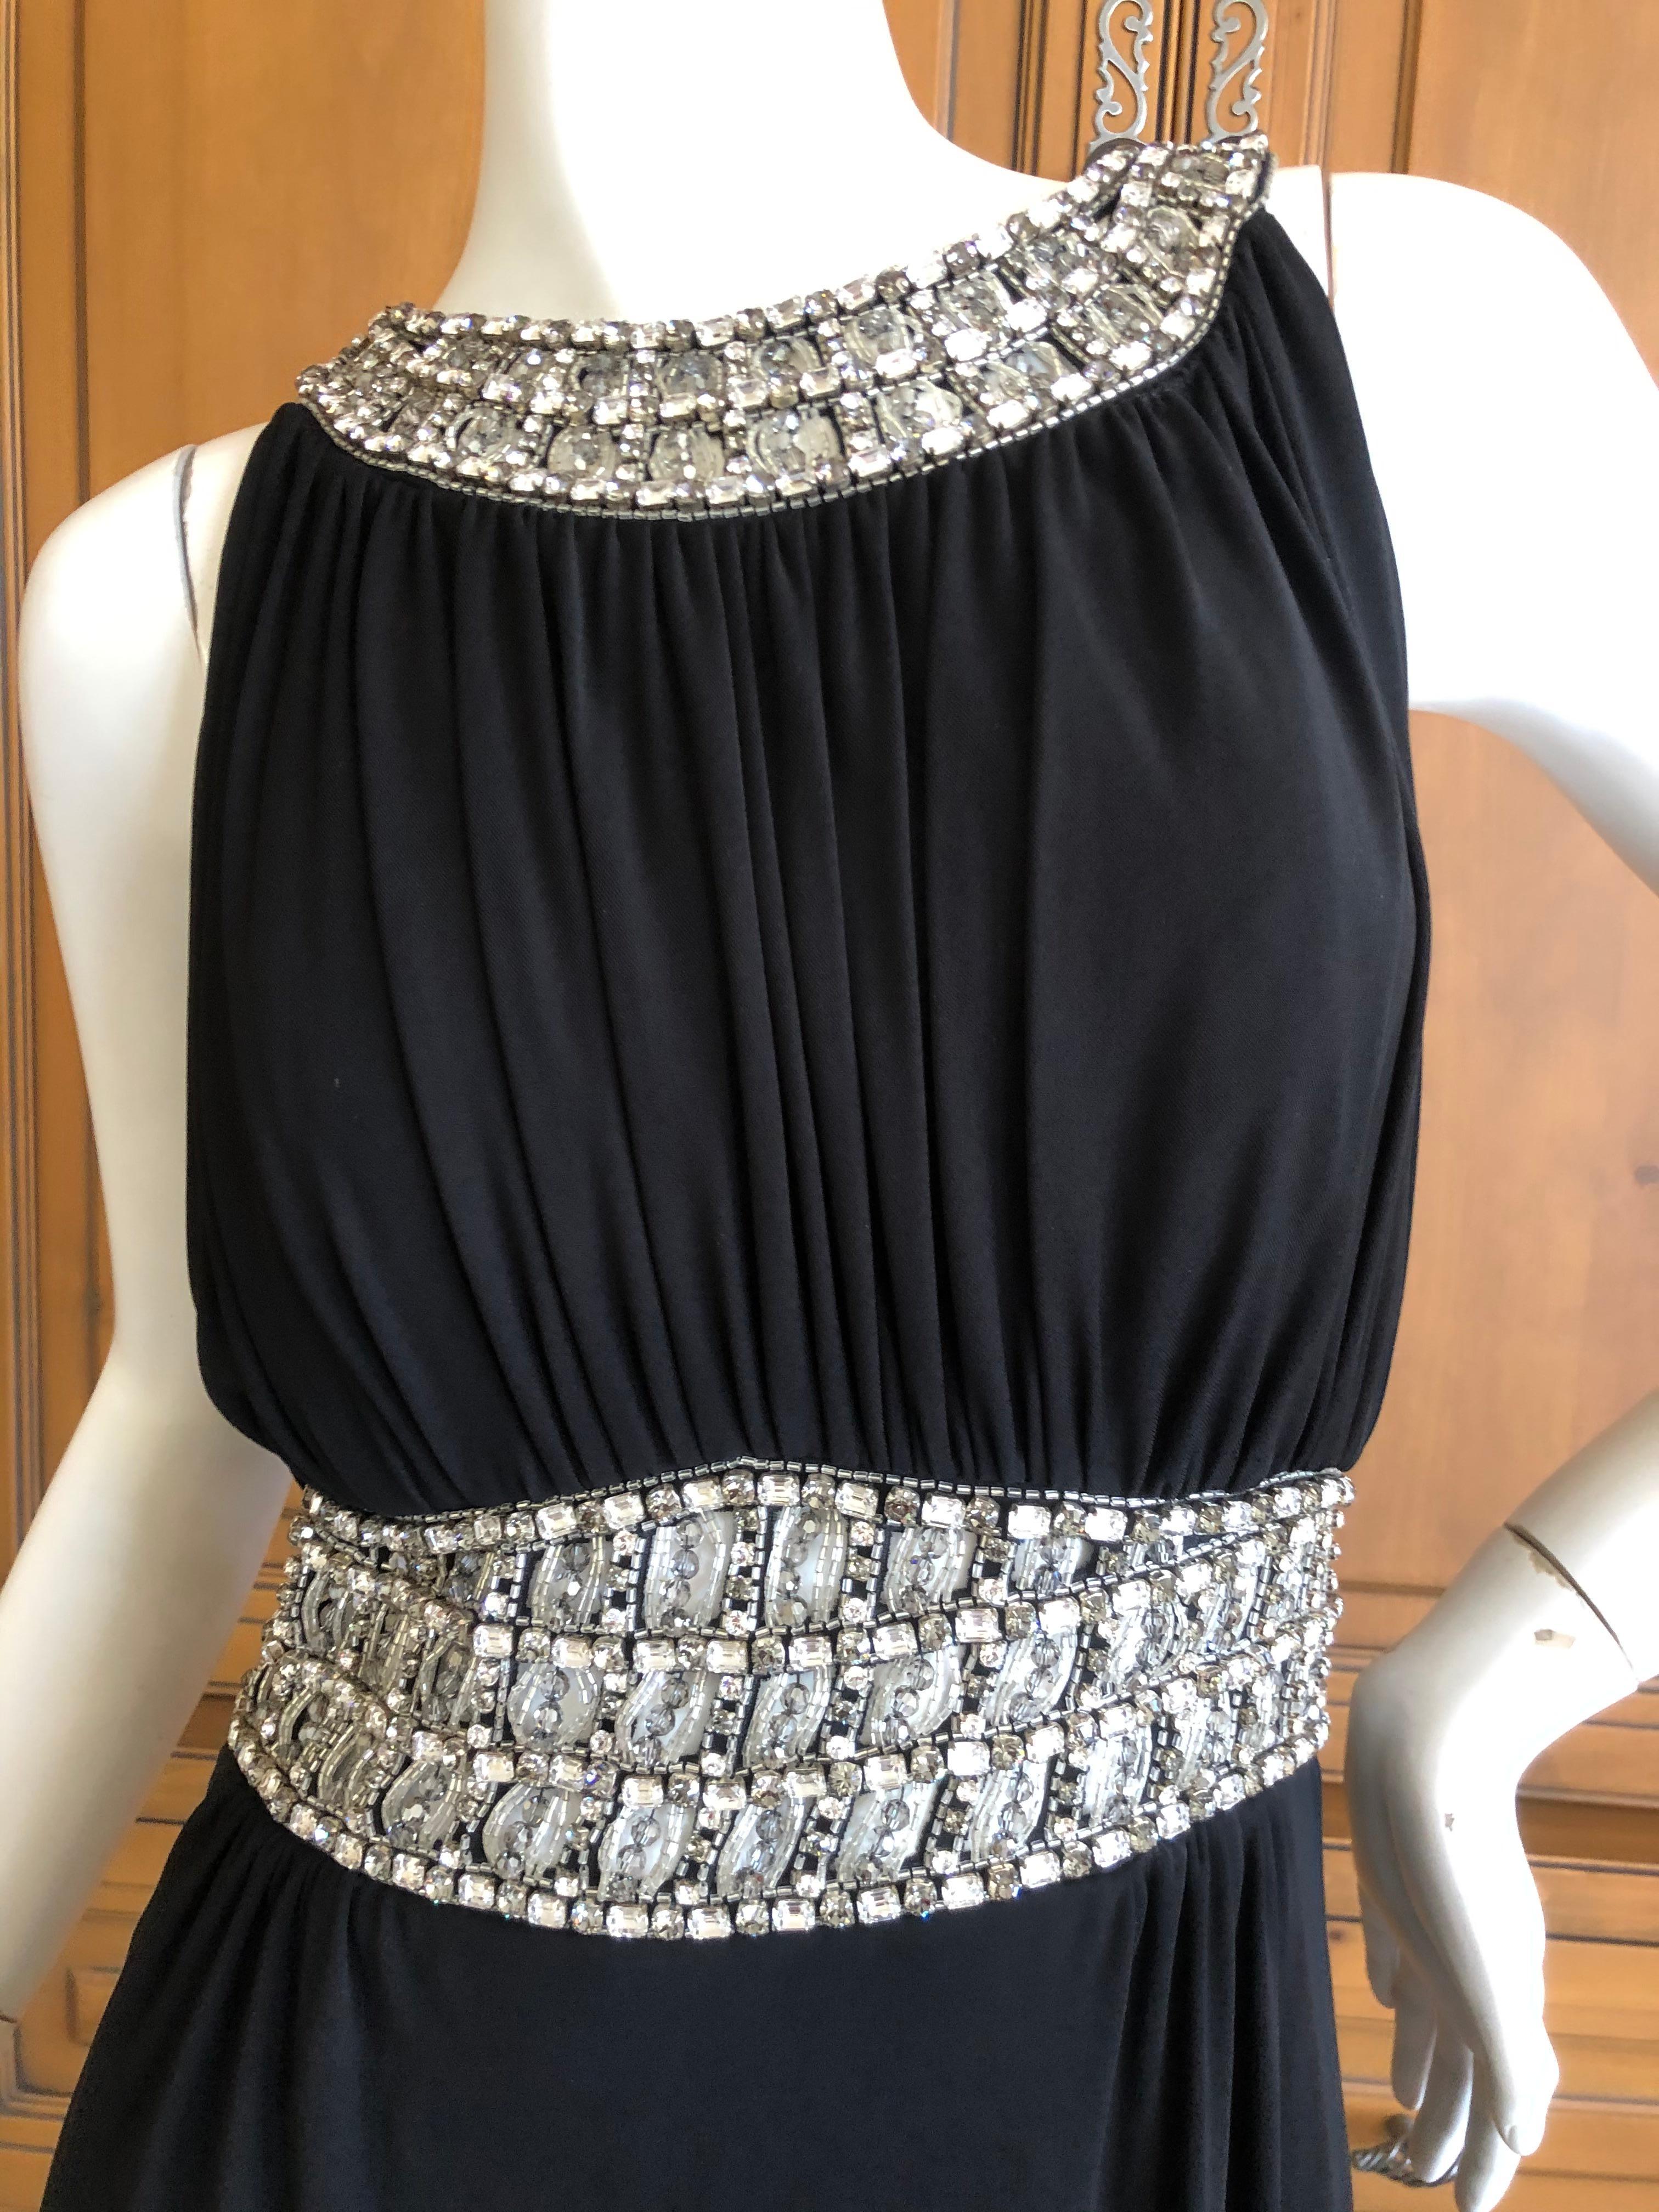 Azzaro Pleated Black Vintage Evening Dress with Jeweled Collar and Belt For Sale 7